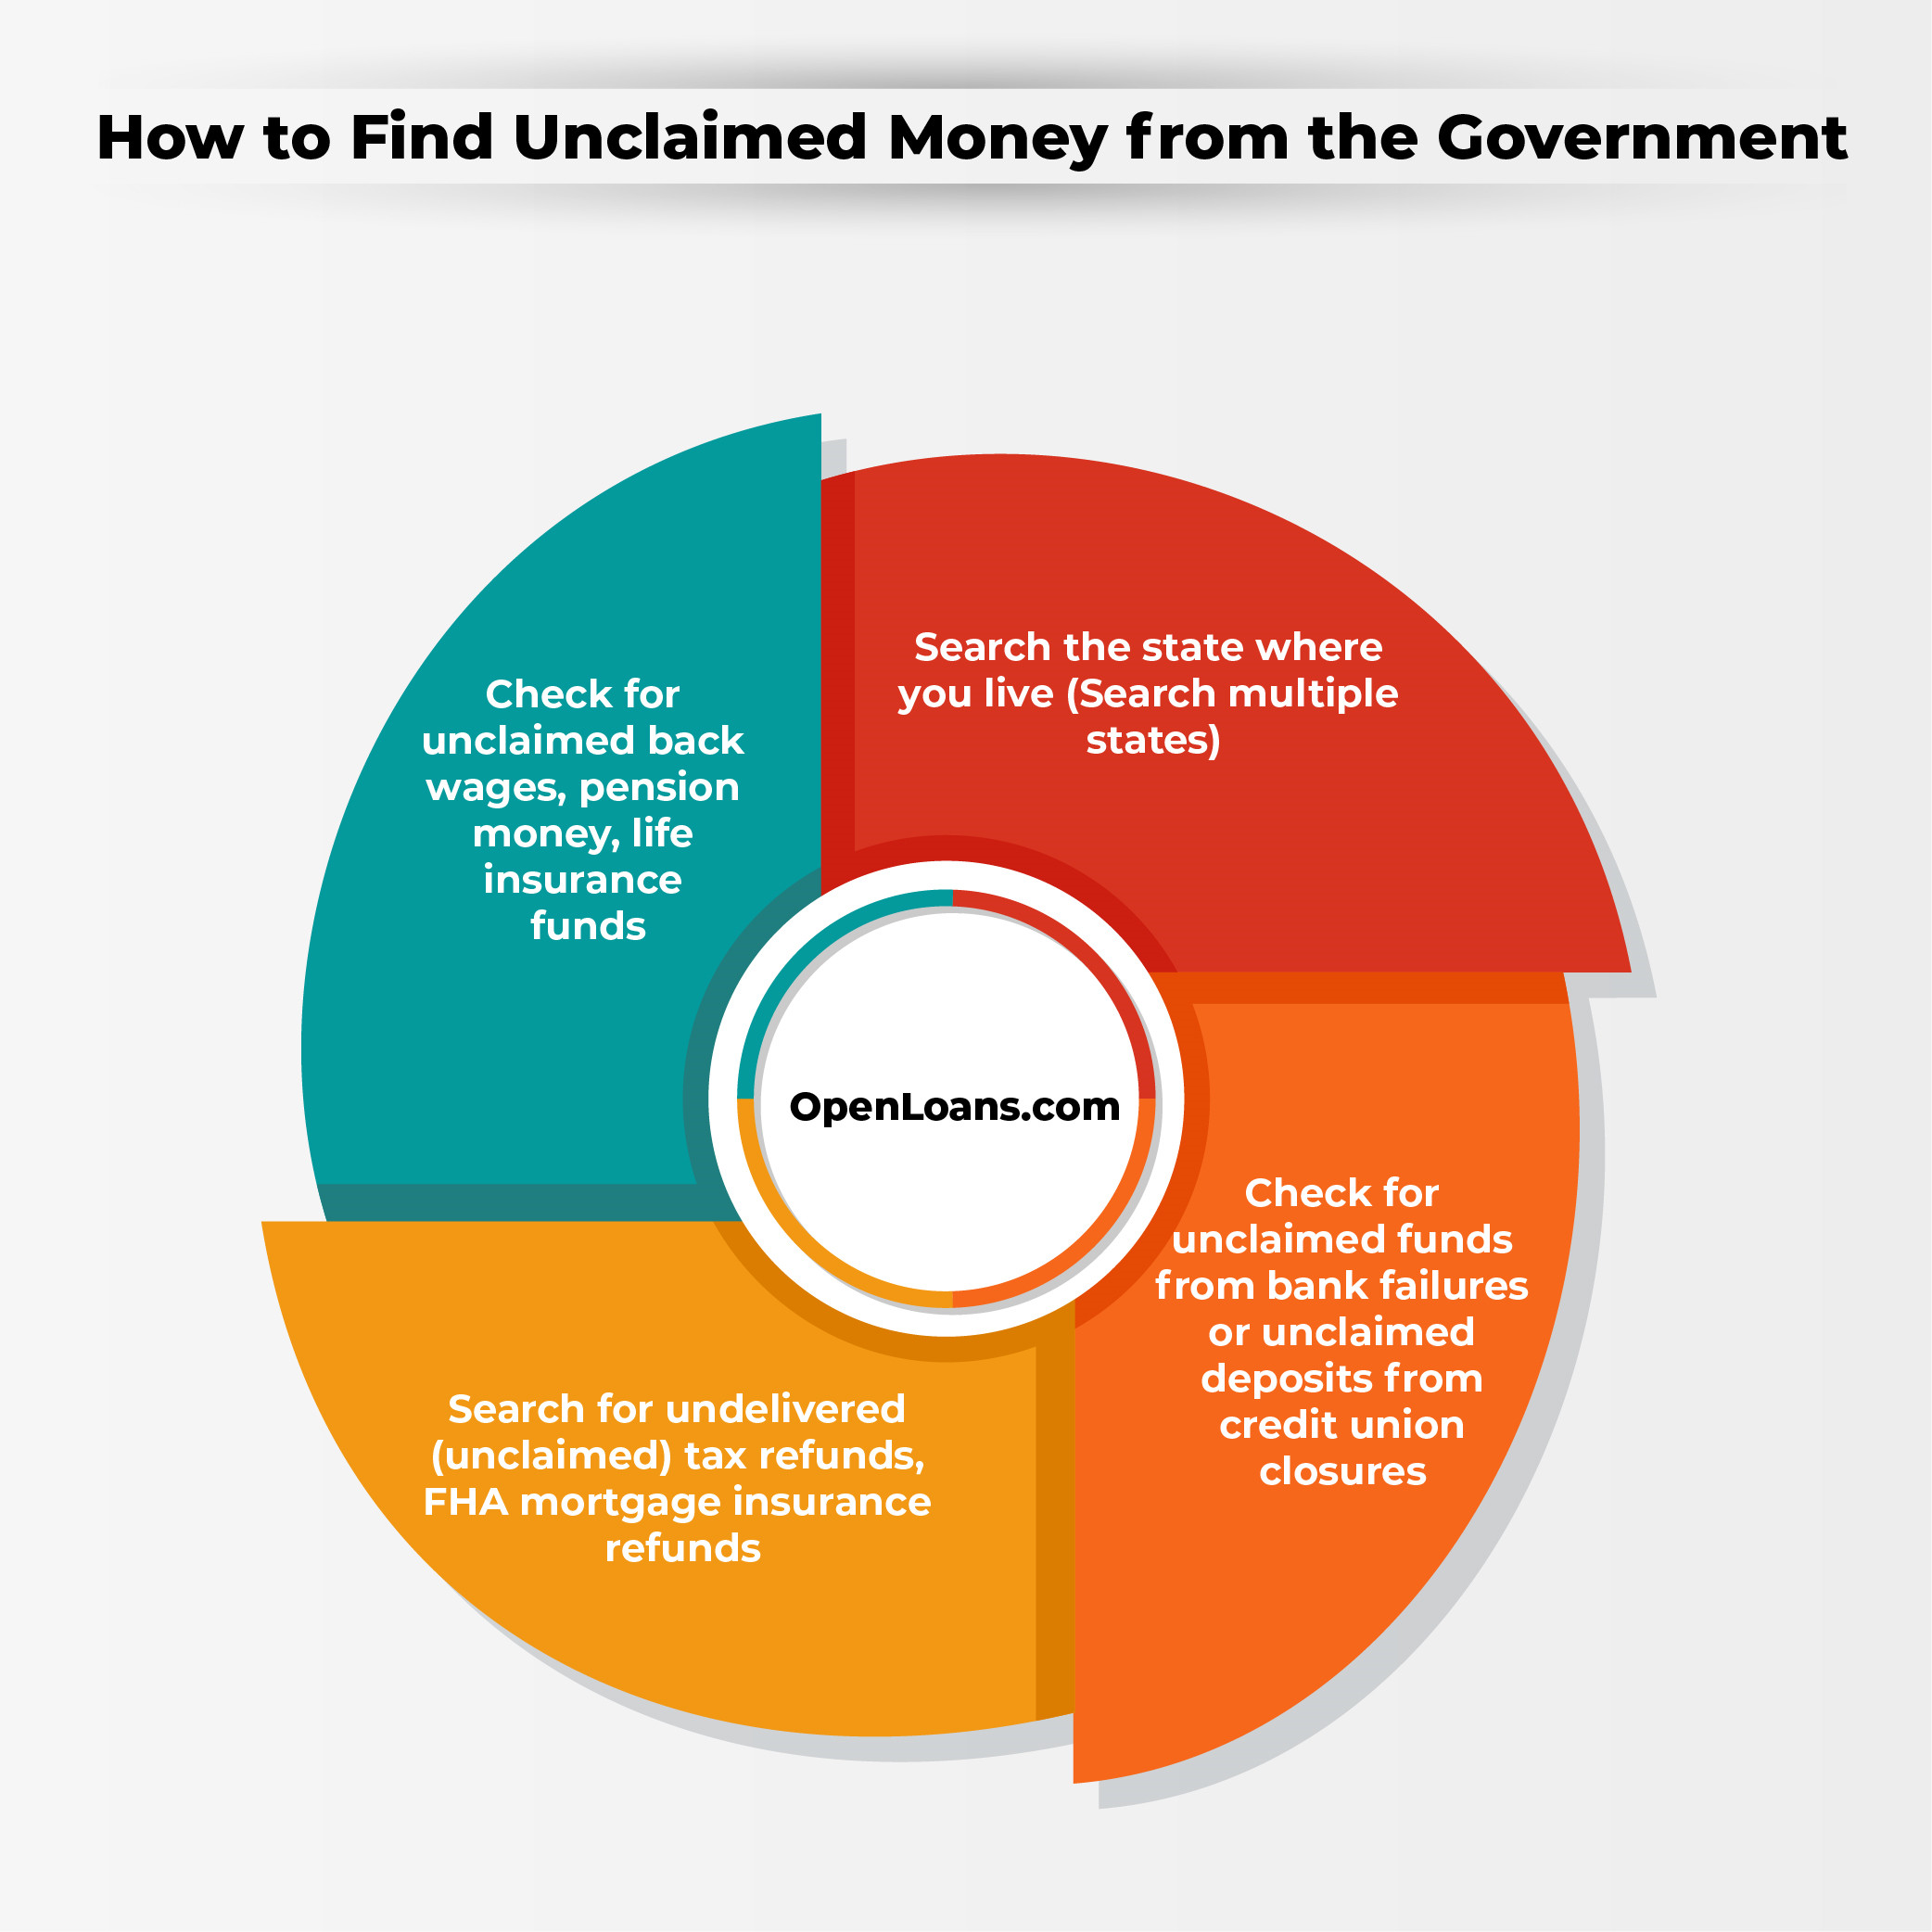 How to find unclaimed money infographic.